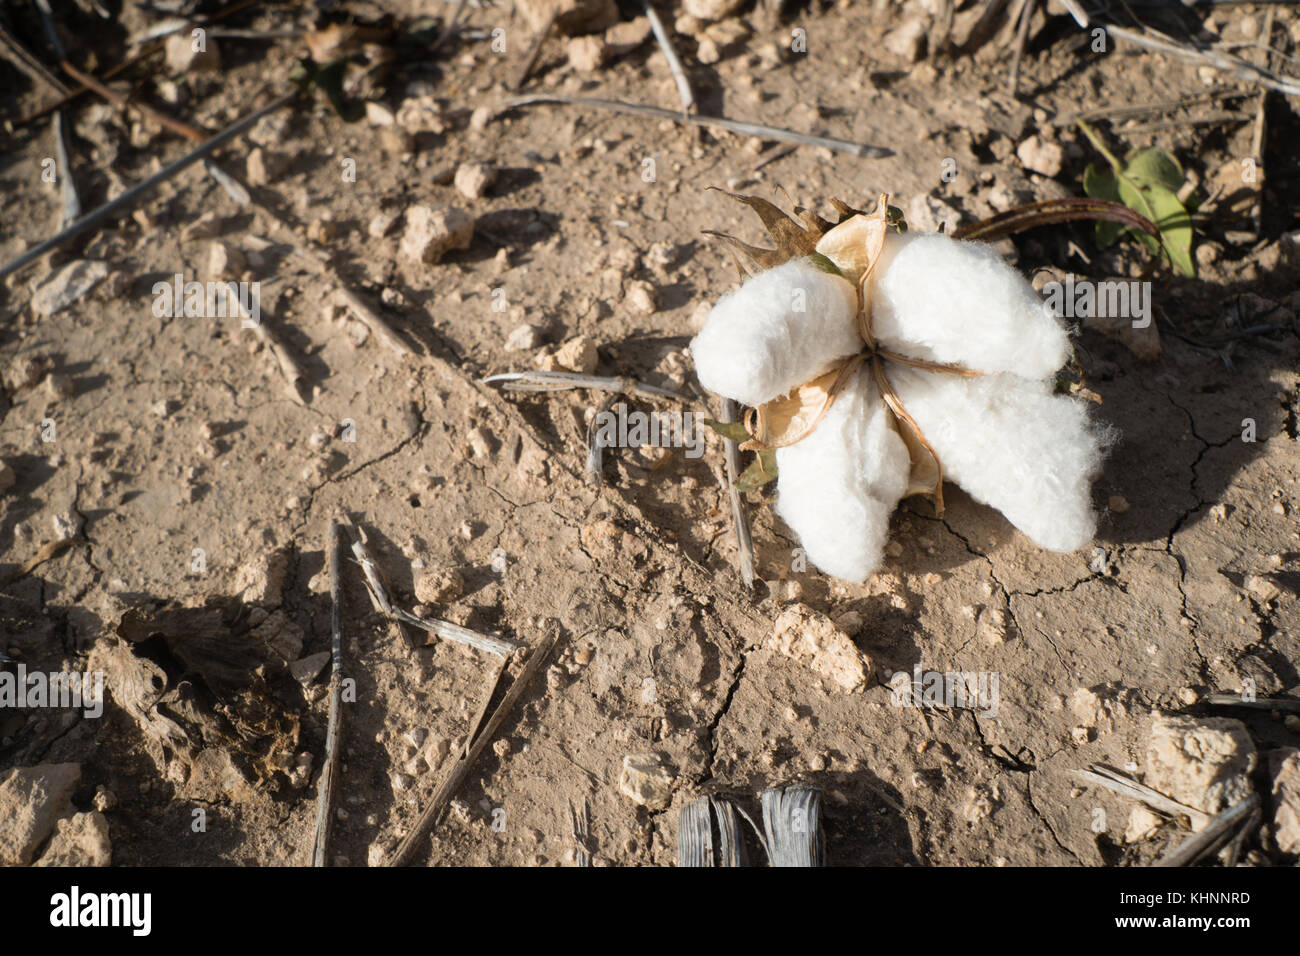 Close up of a fallen opening cotton boll in the field on the ground Stock Photo